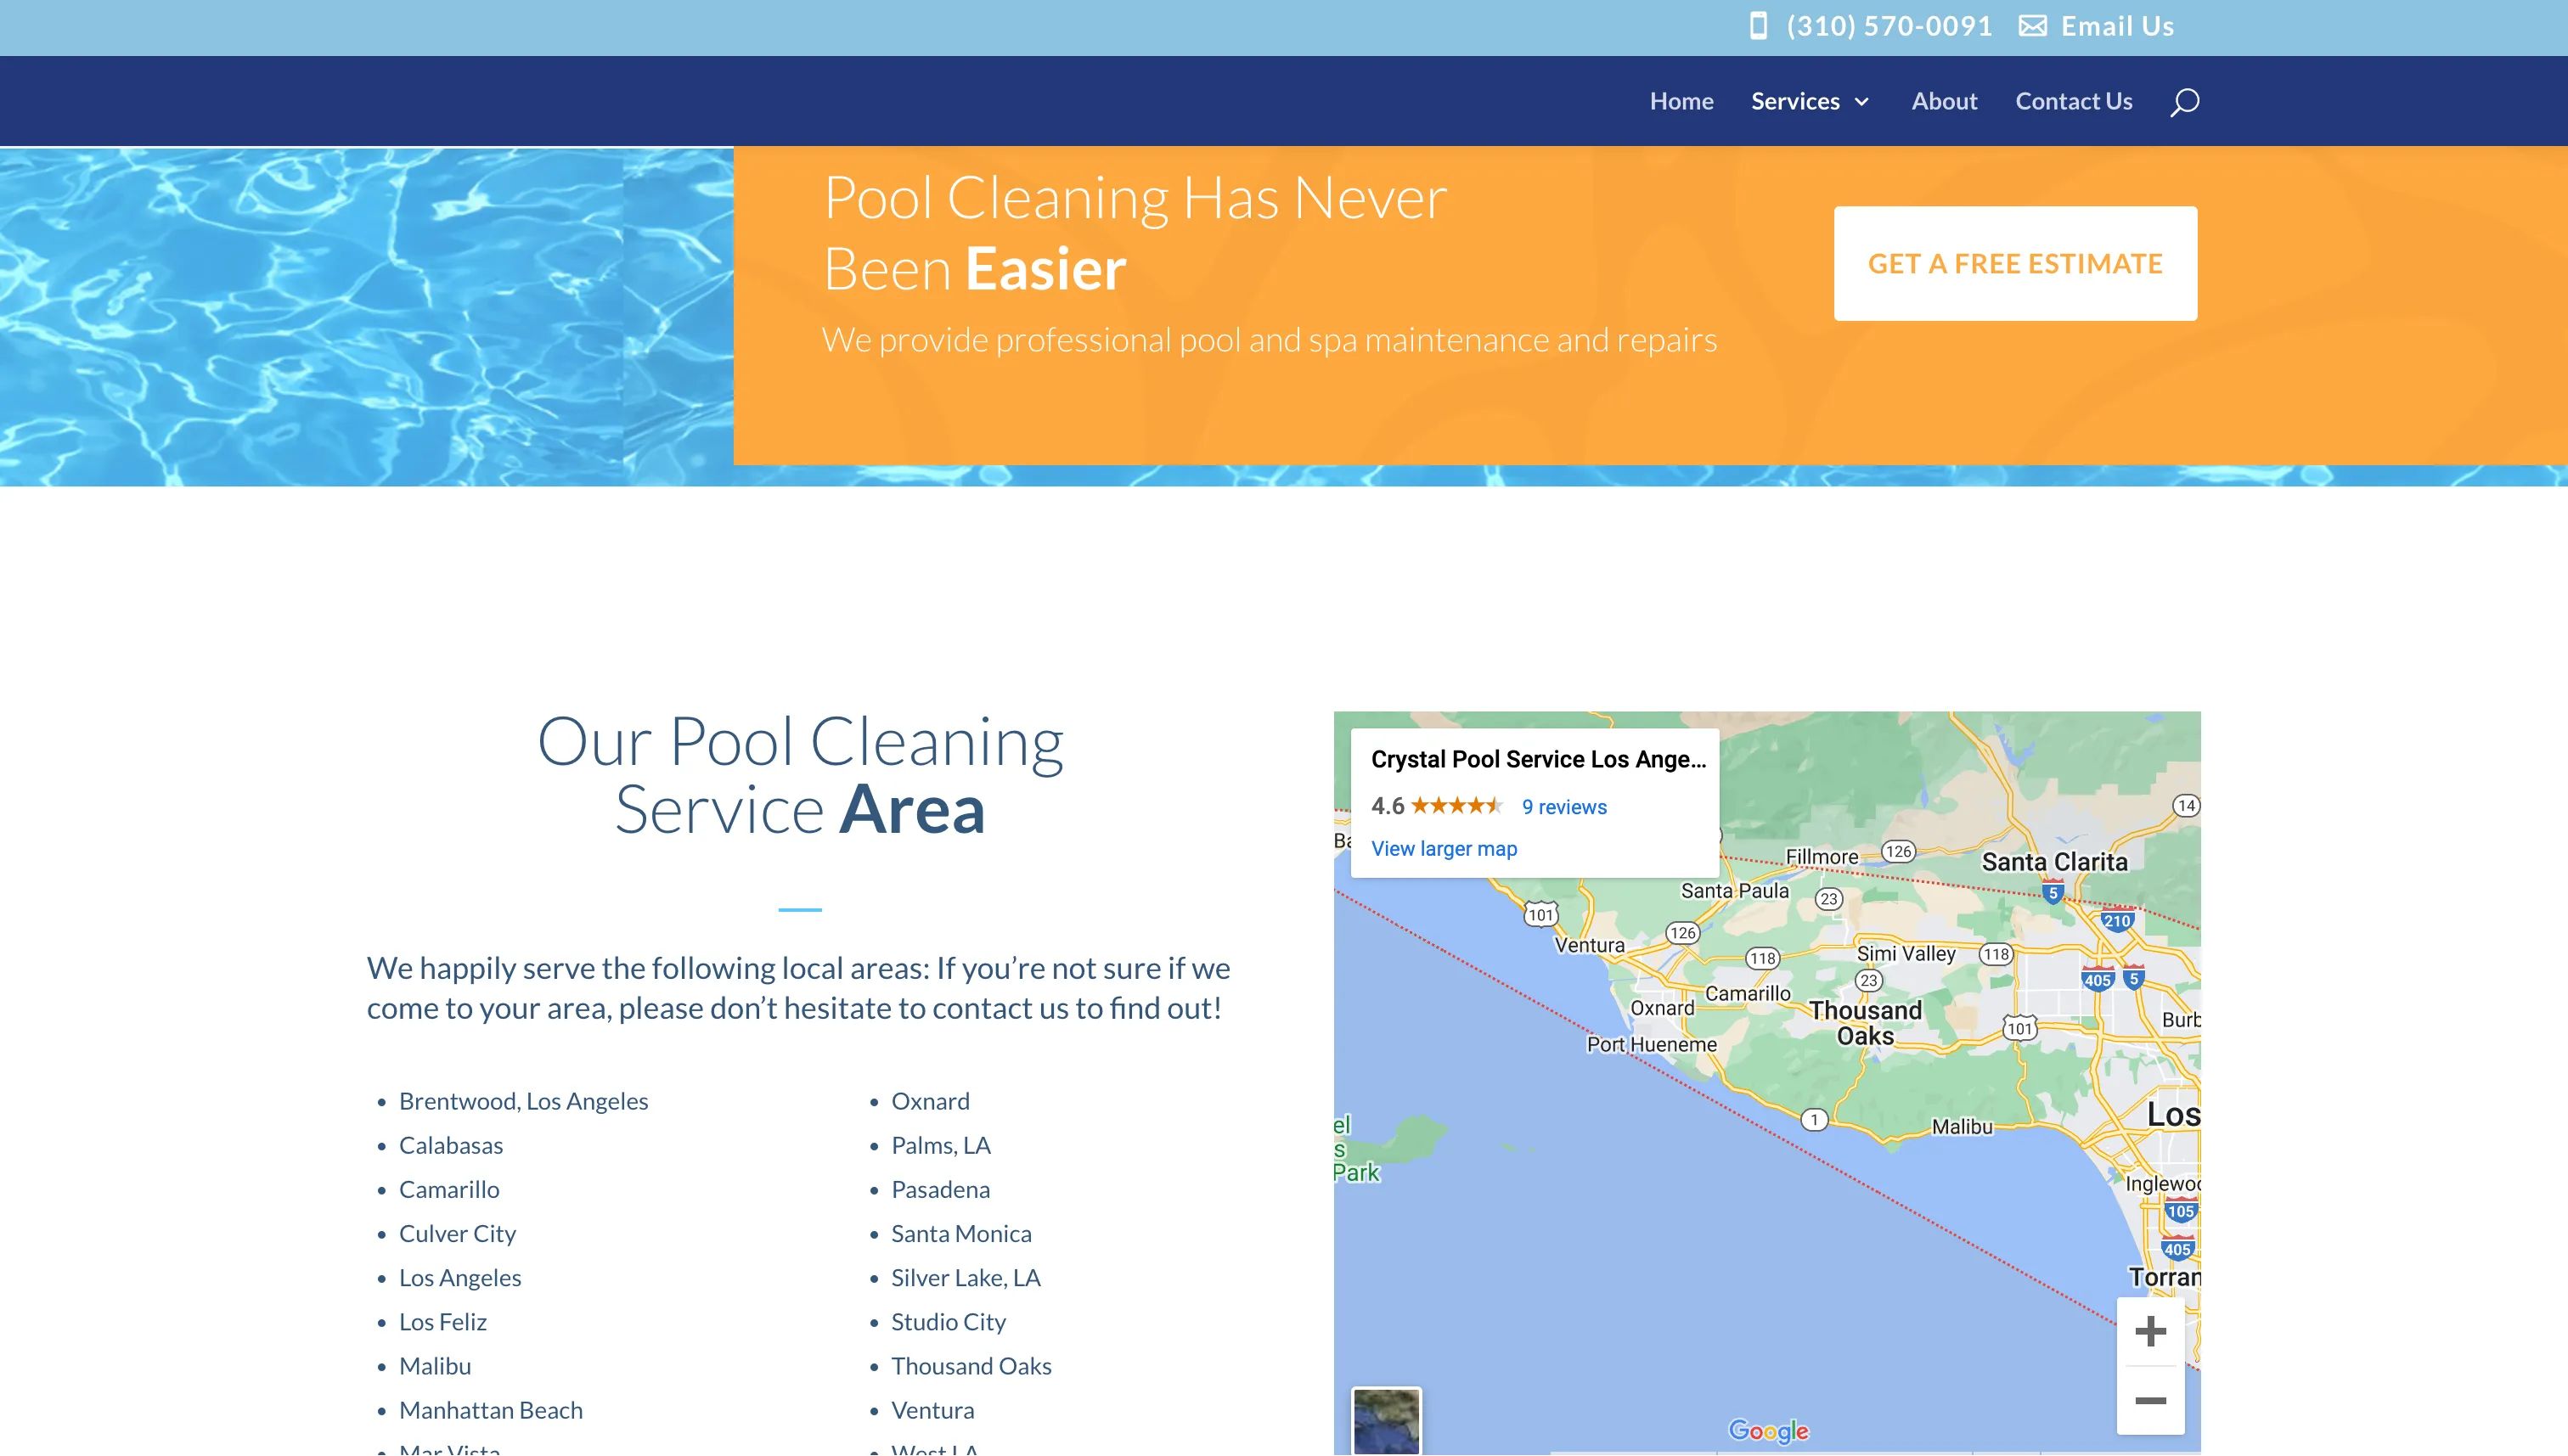 Crystal Pool Services service area map on a web page